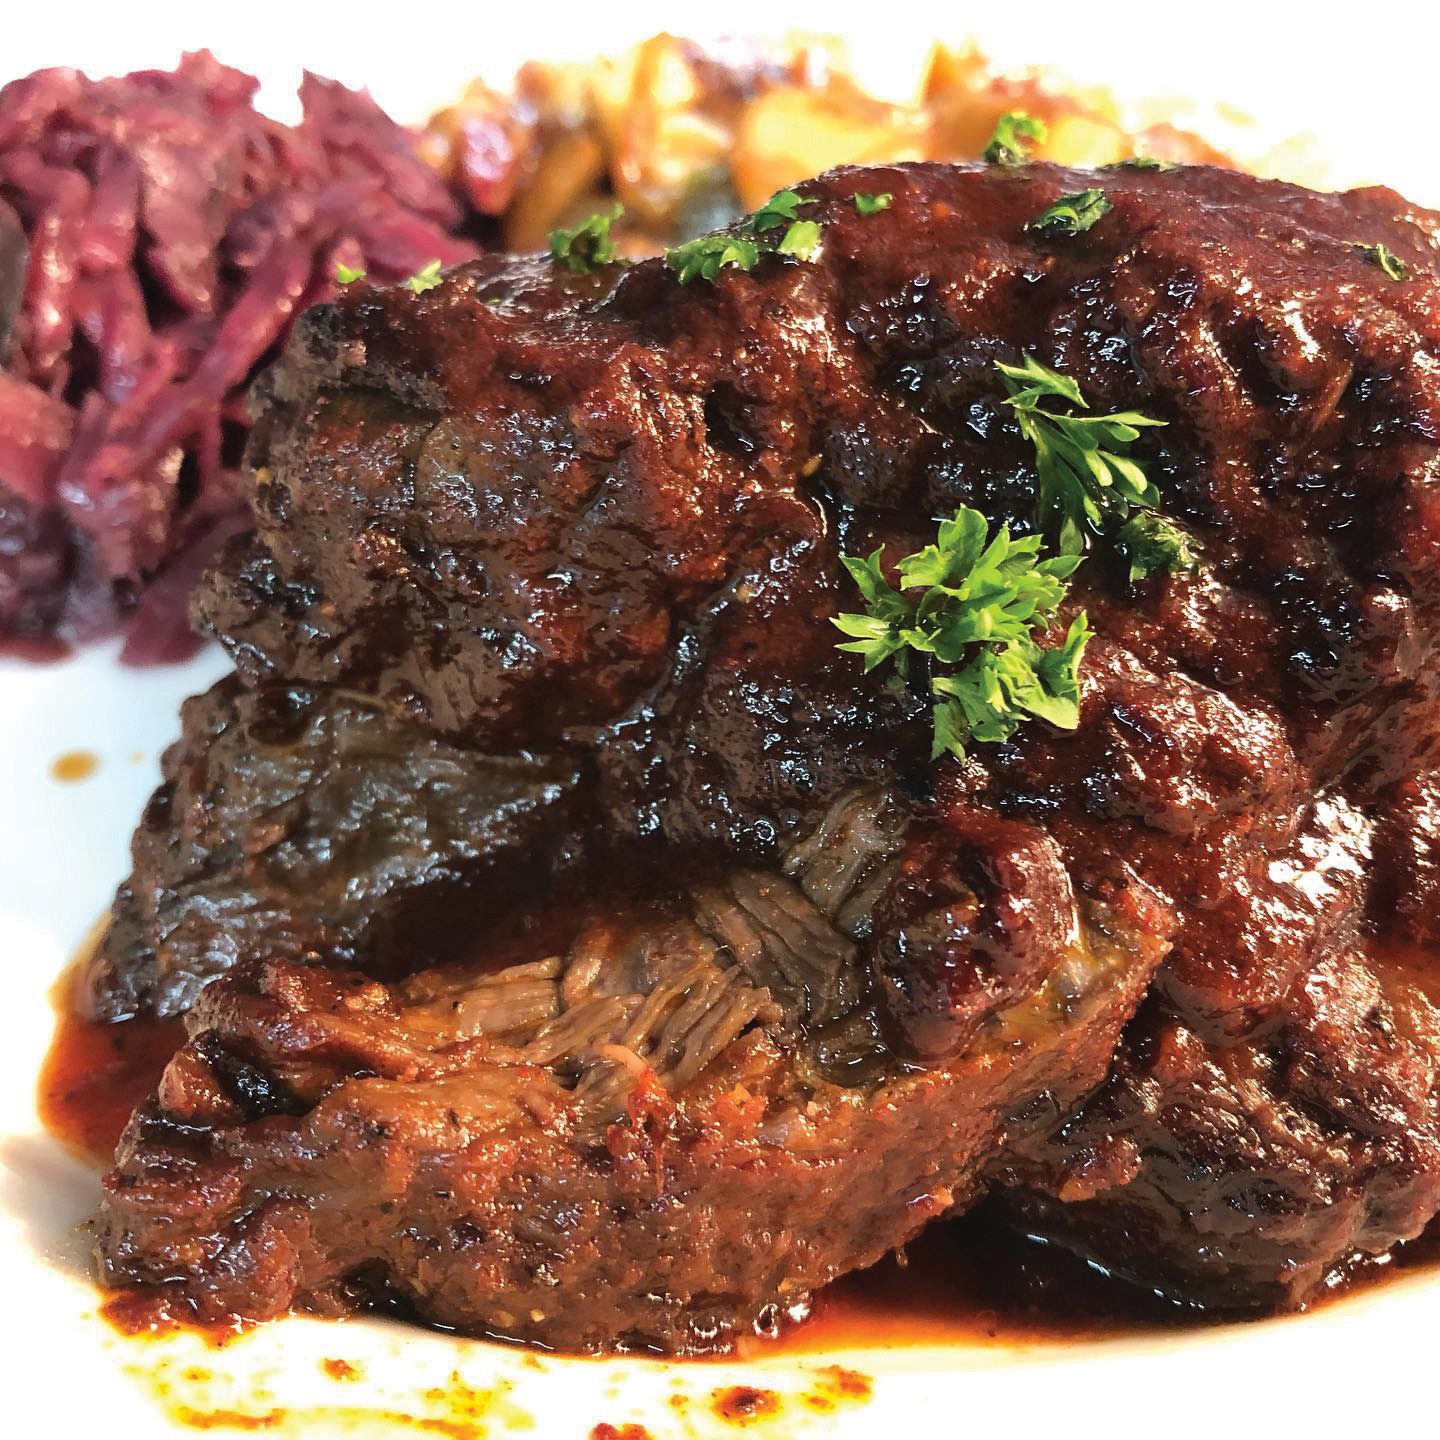 Sauerbraten with Braised Red Cabbage